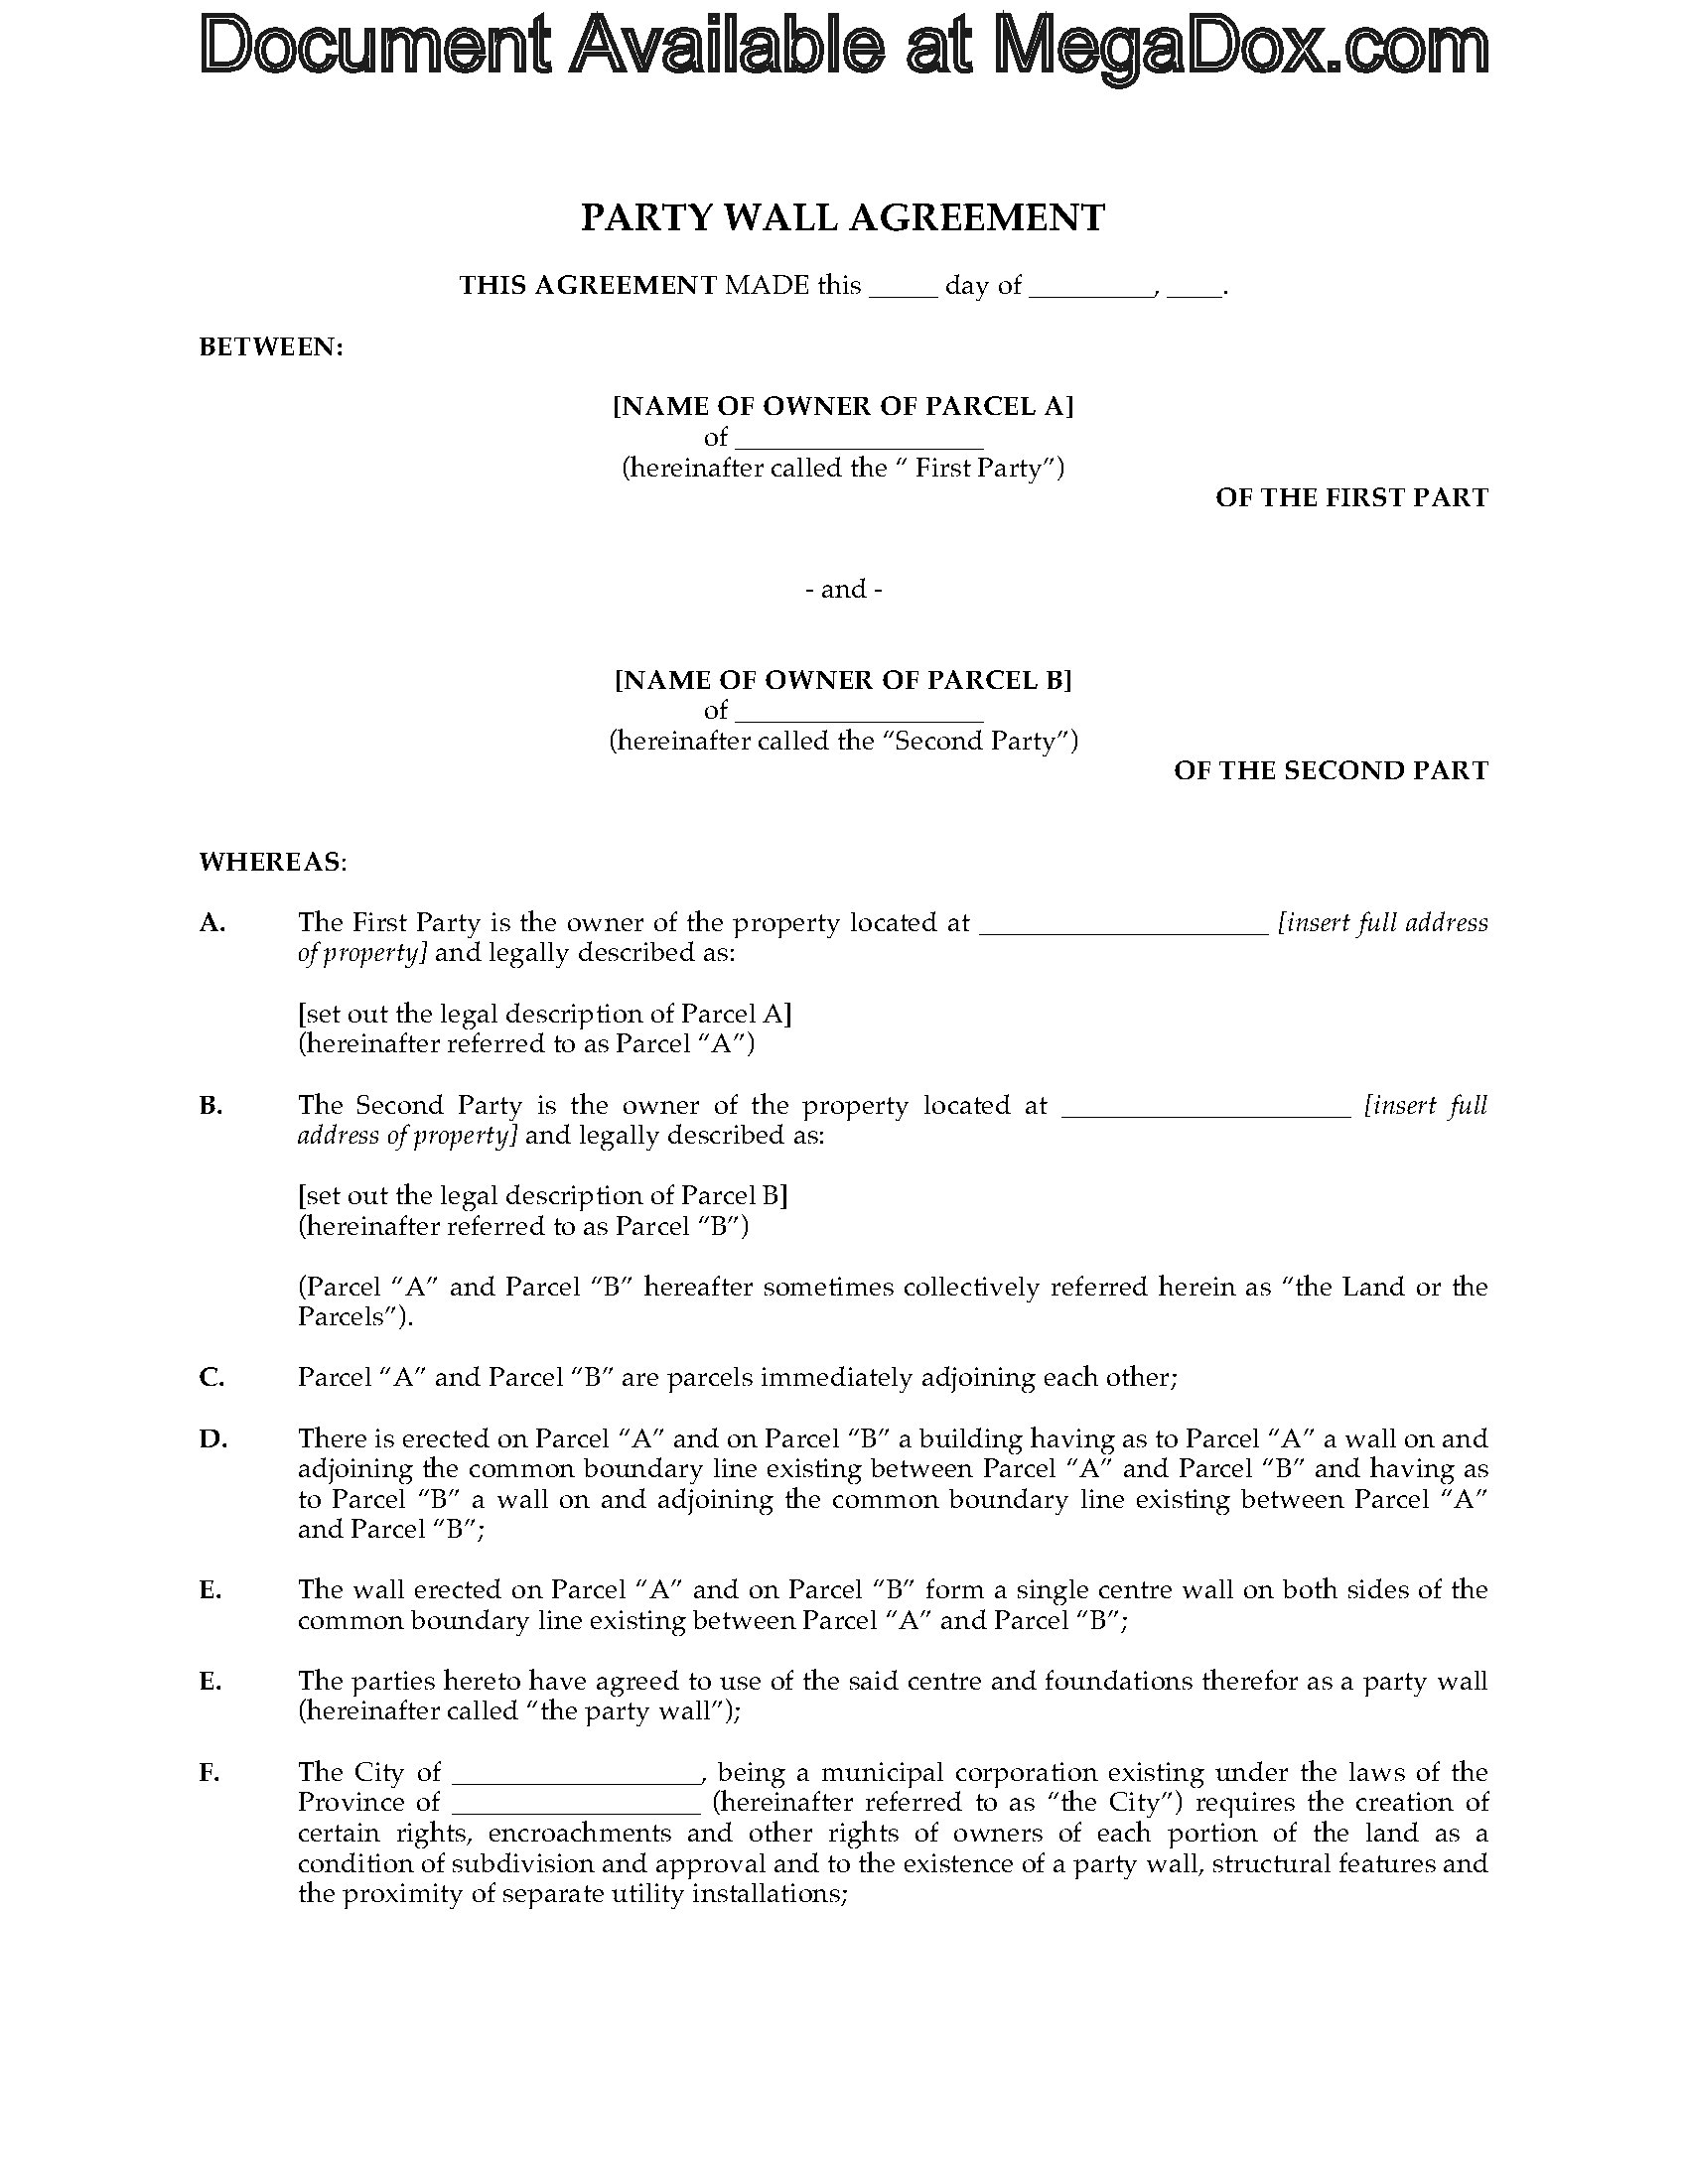 Canada Party Wall Agreement | Legal Forms and Business Templates 